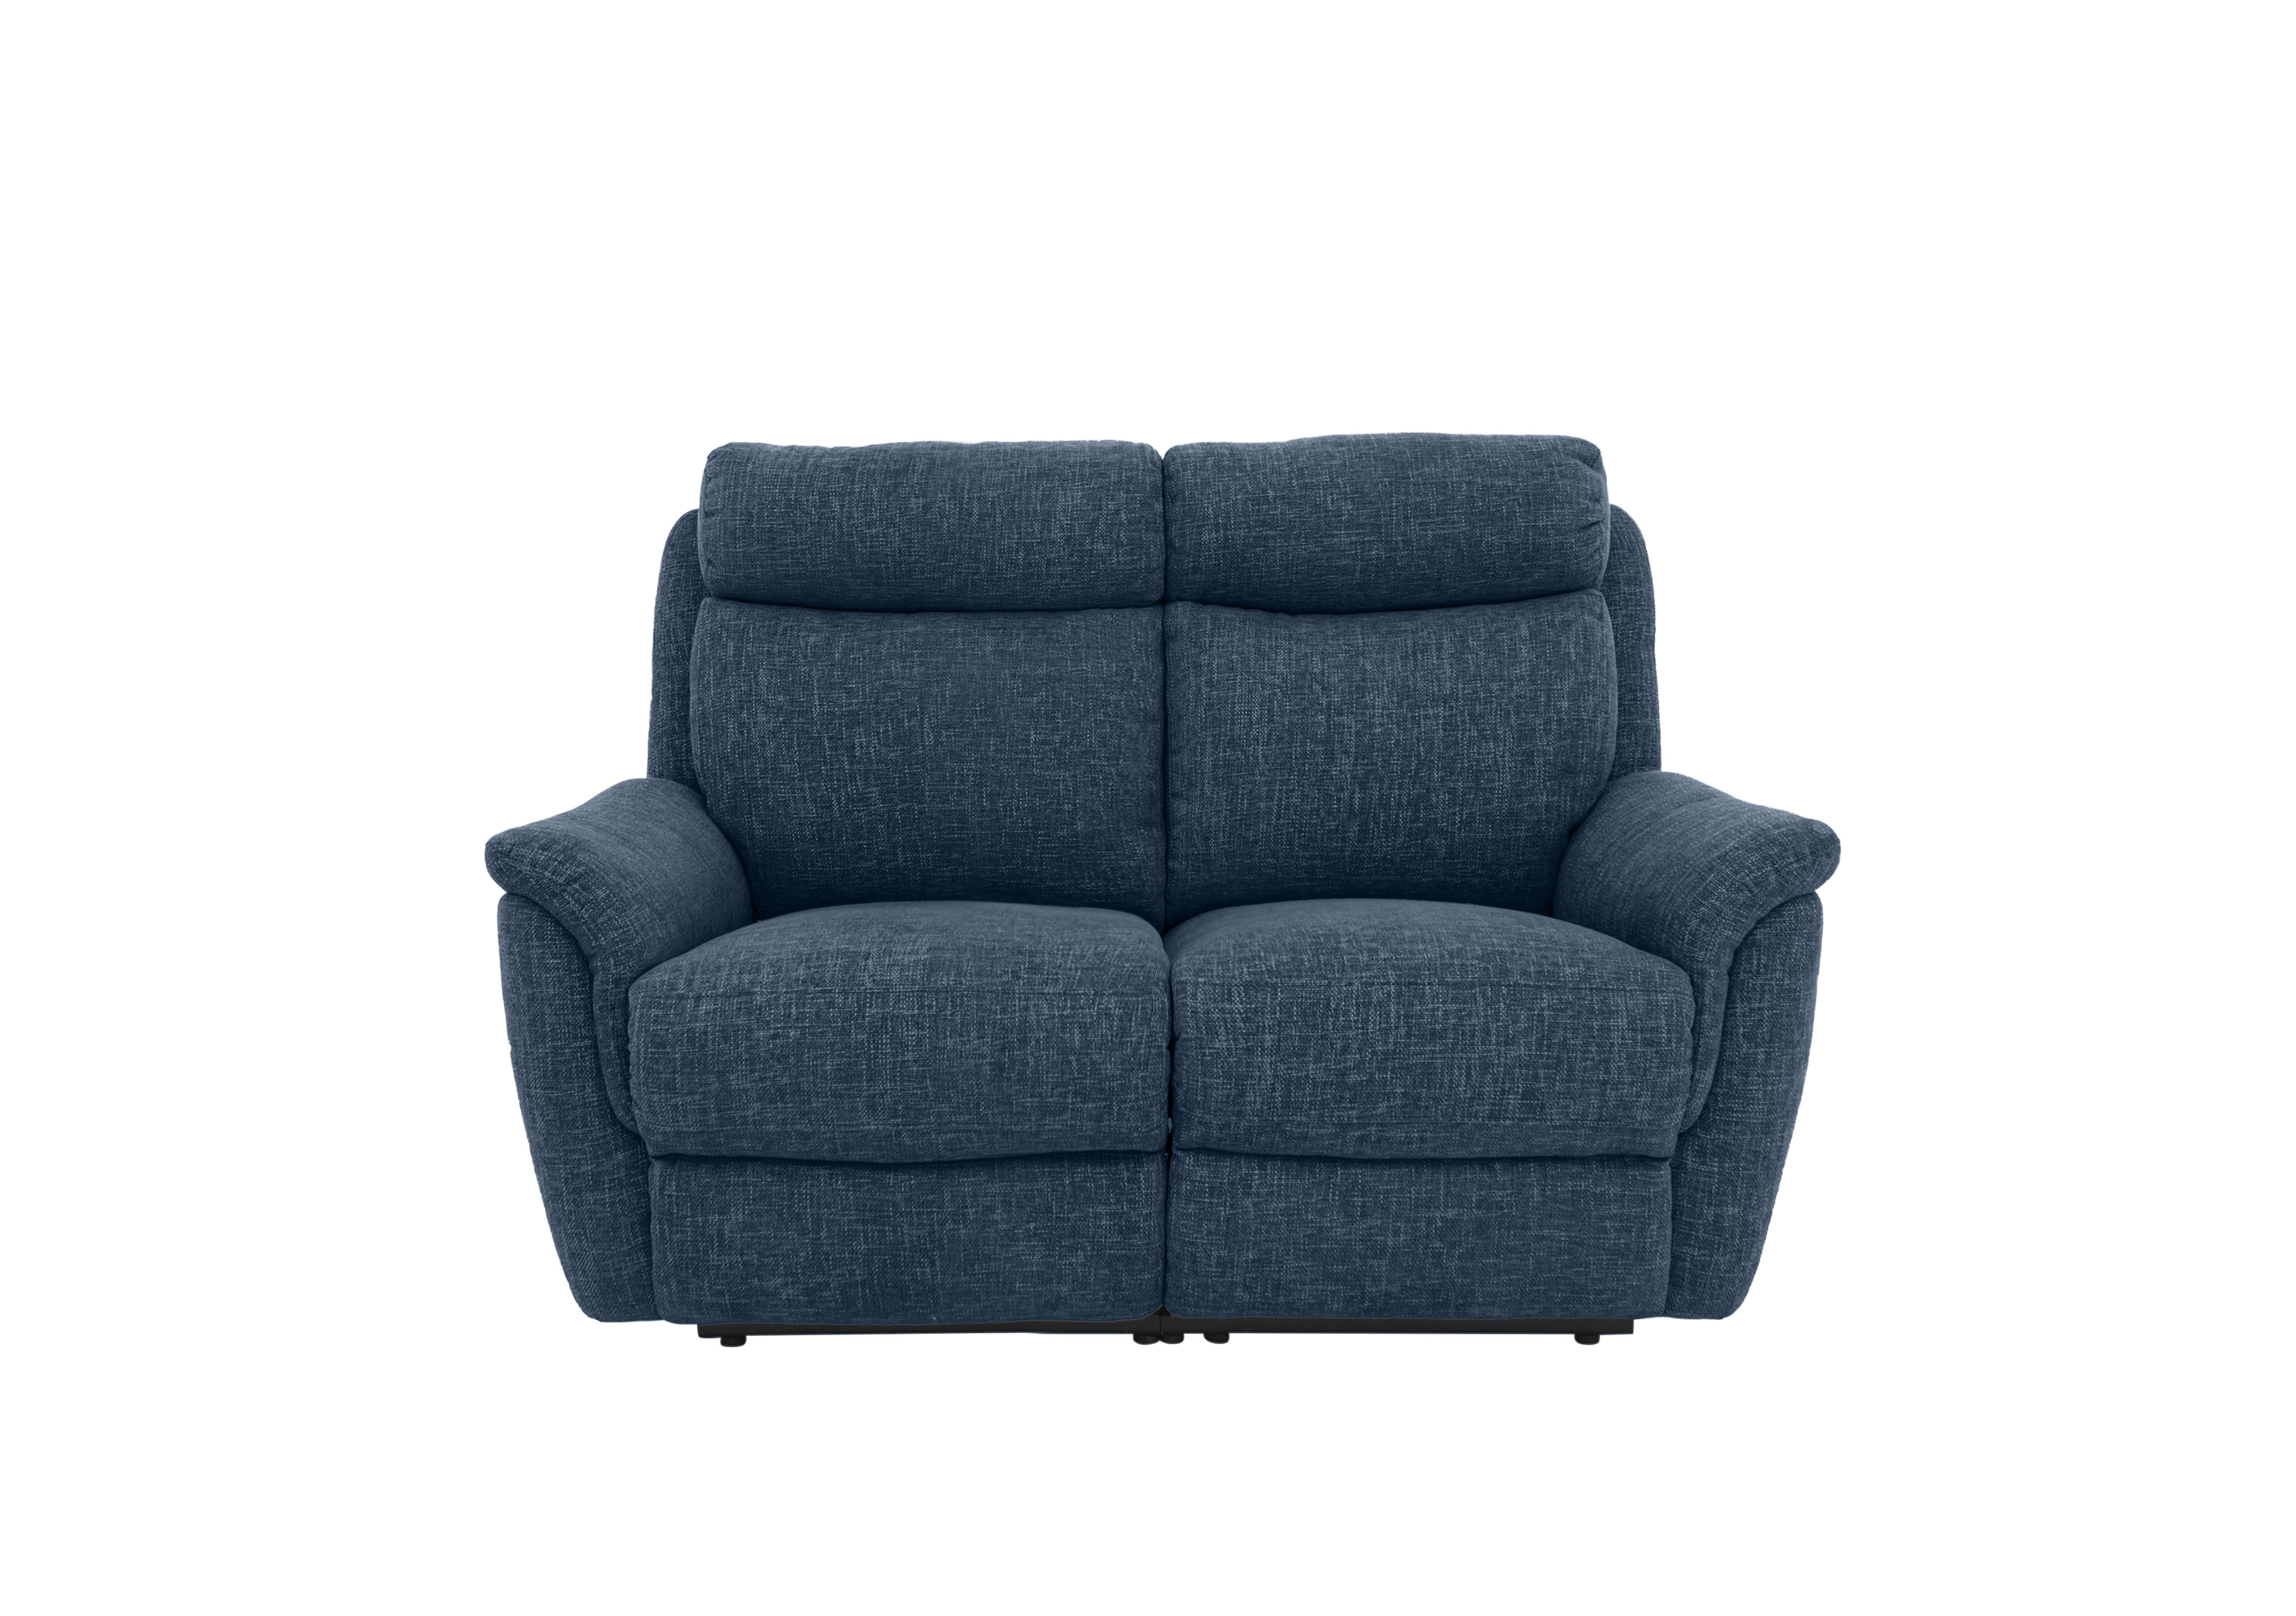 Orlando 2 Seater Fabric Power Recliner Sofa with Power Headrests and Lumbar Support in Anivia Blue 15045 on Furniture Village